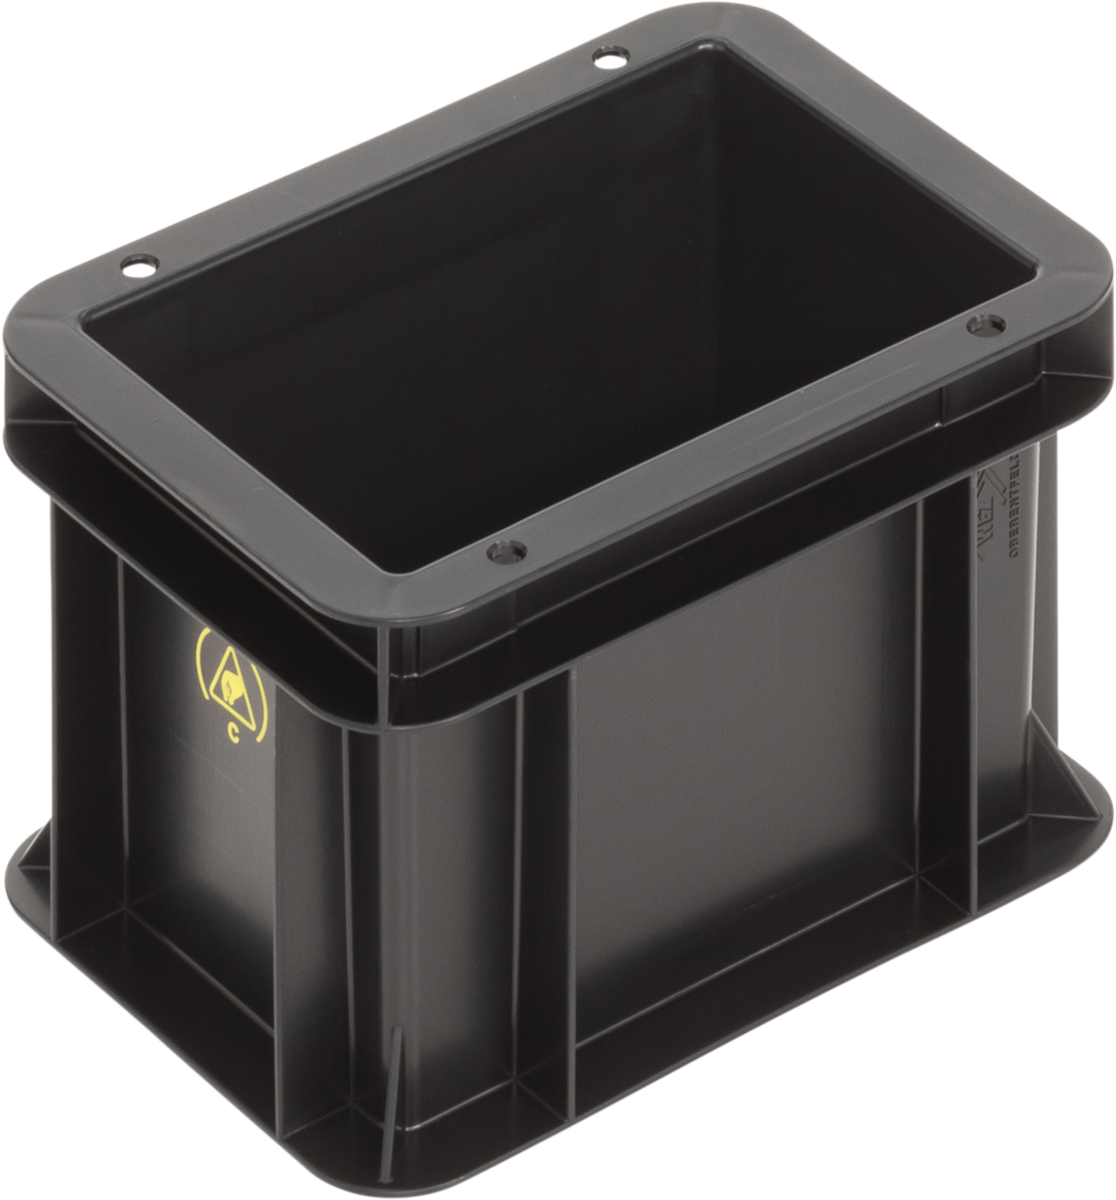 ESD-Safe-SGL-Norm-Stacking-Bin-Containers-Flat-Base-Ref.-2113.007.992_1004183_200x150x145_01